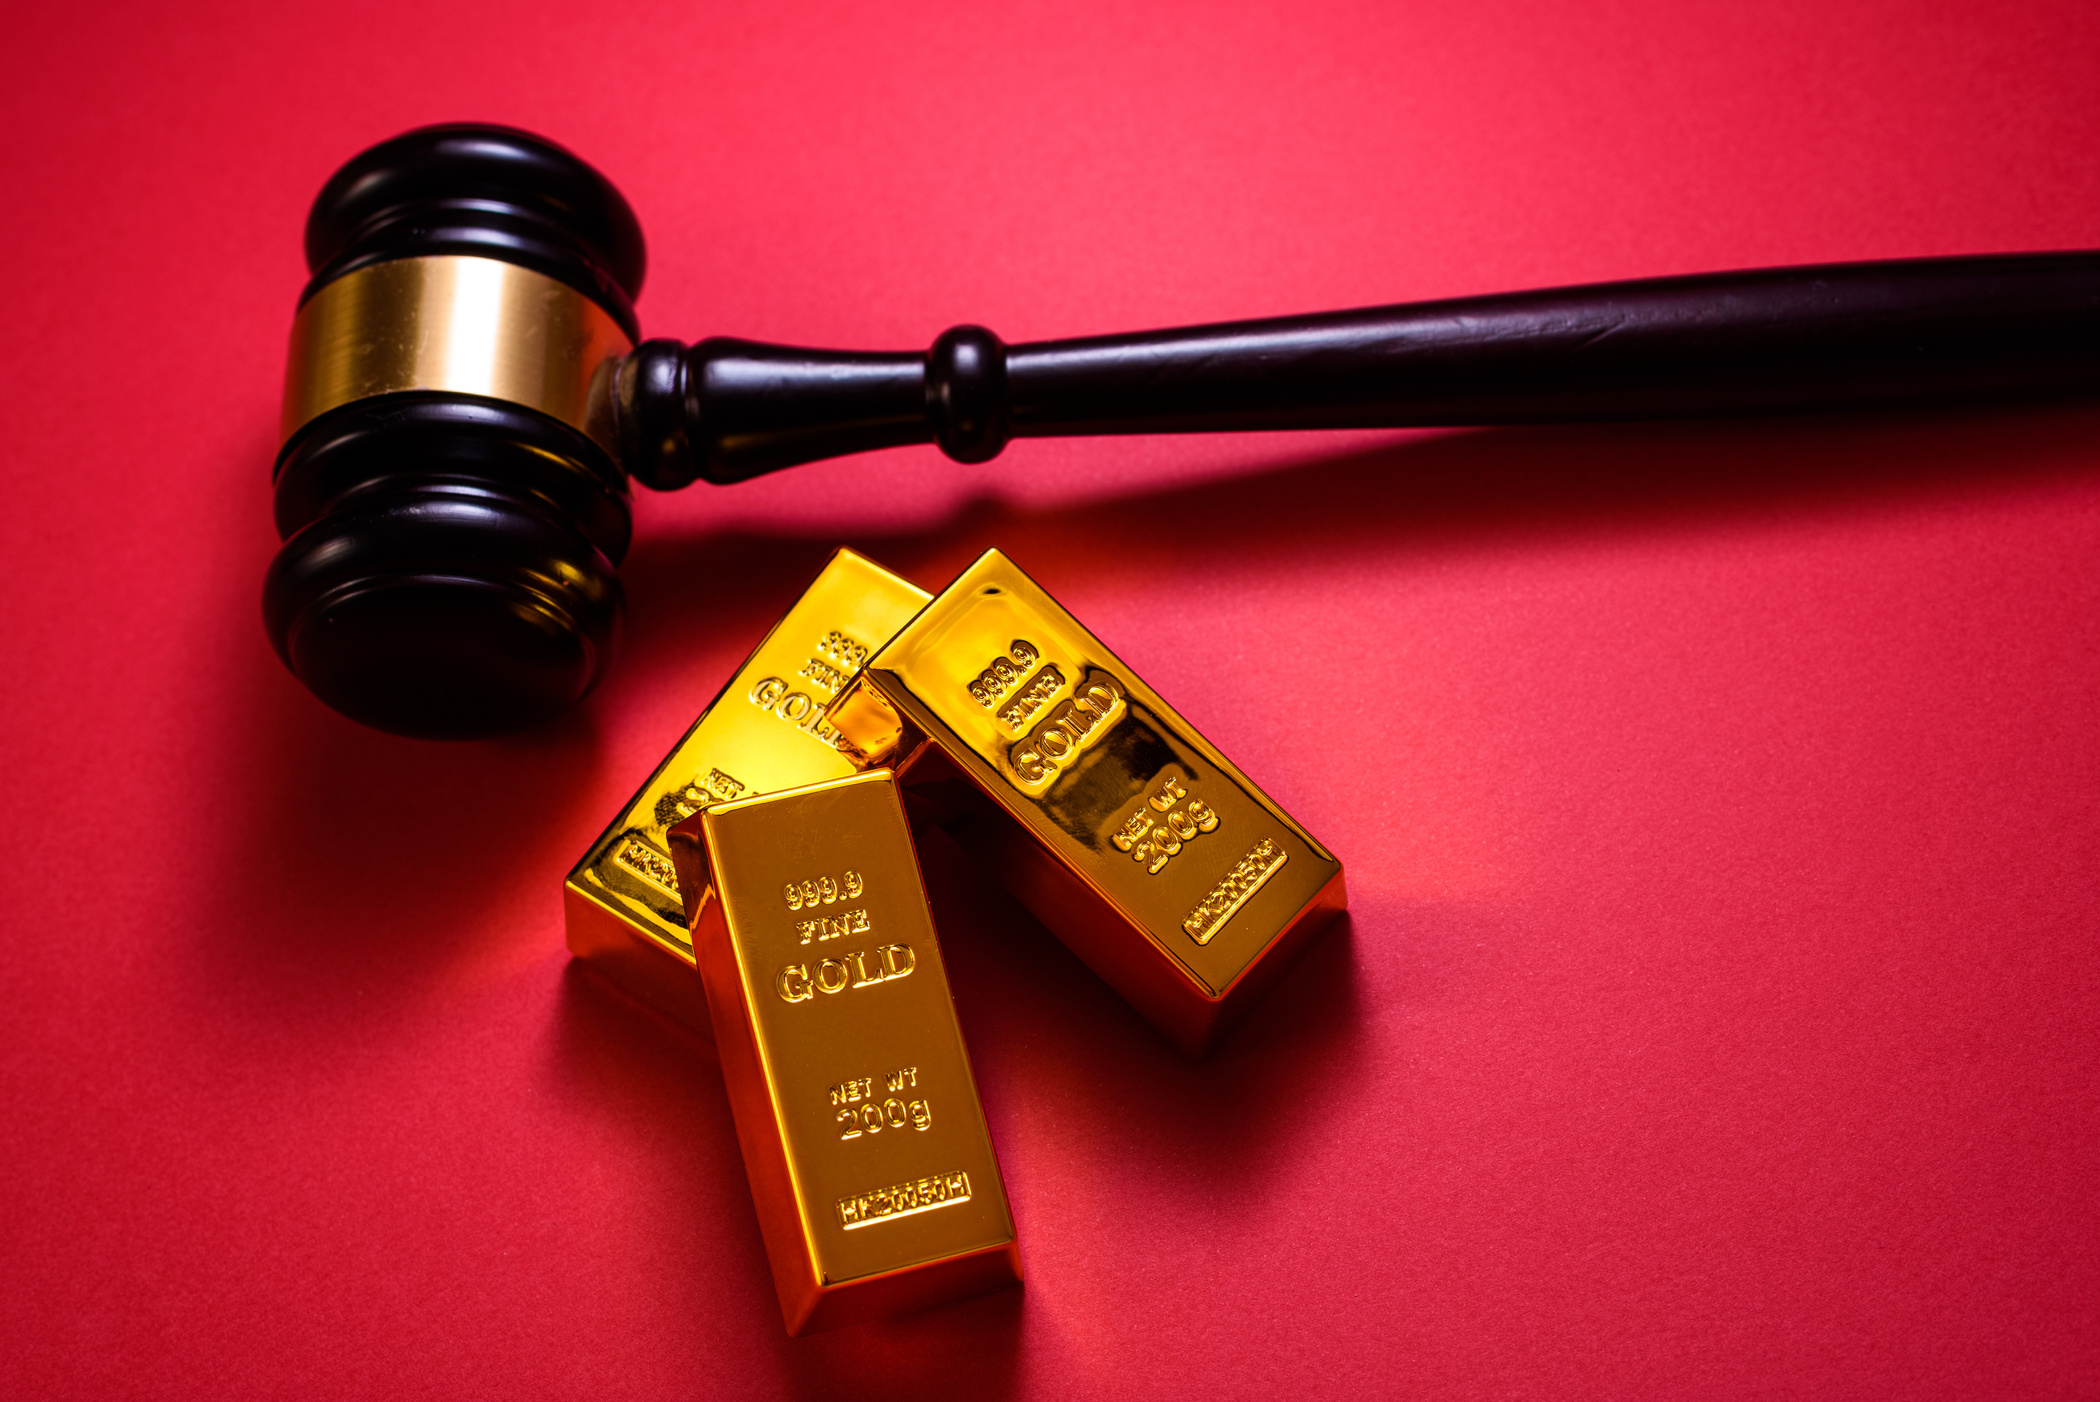 Gold Mining Will Have Legal Problems That Will Be Resolved in Th